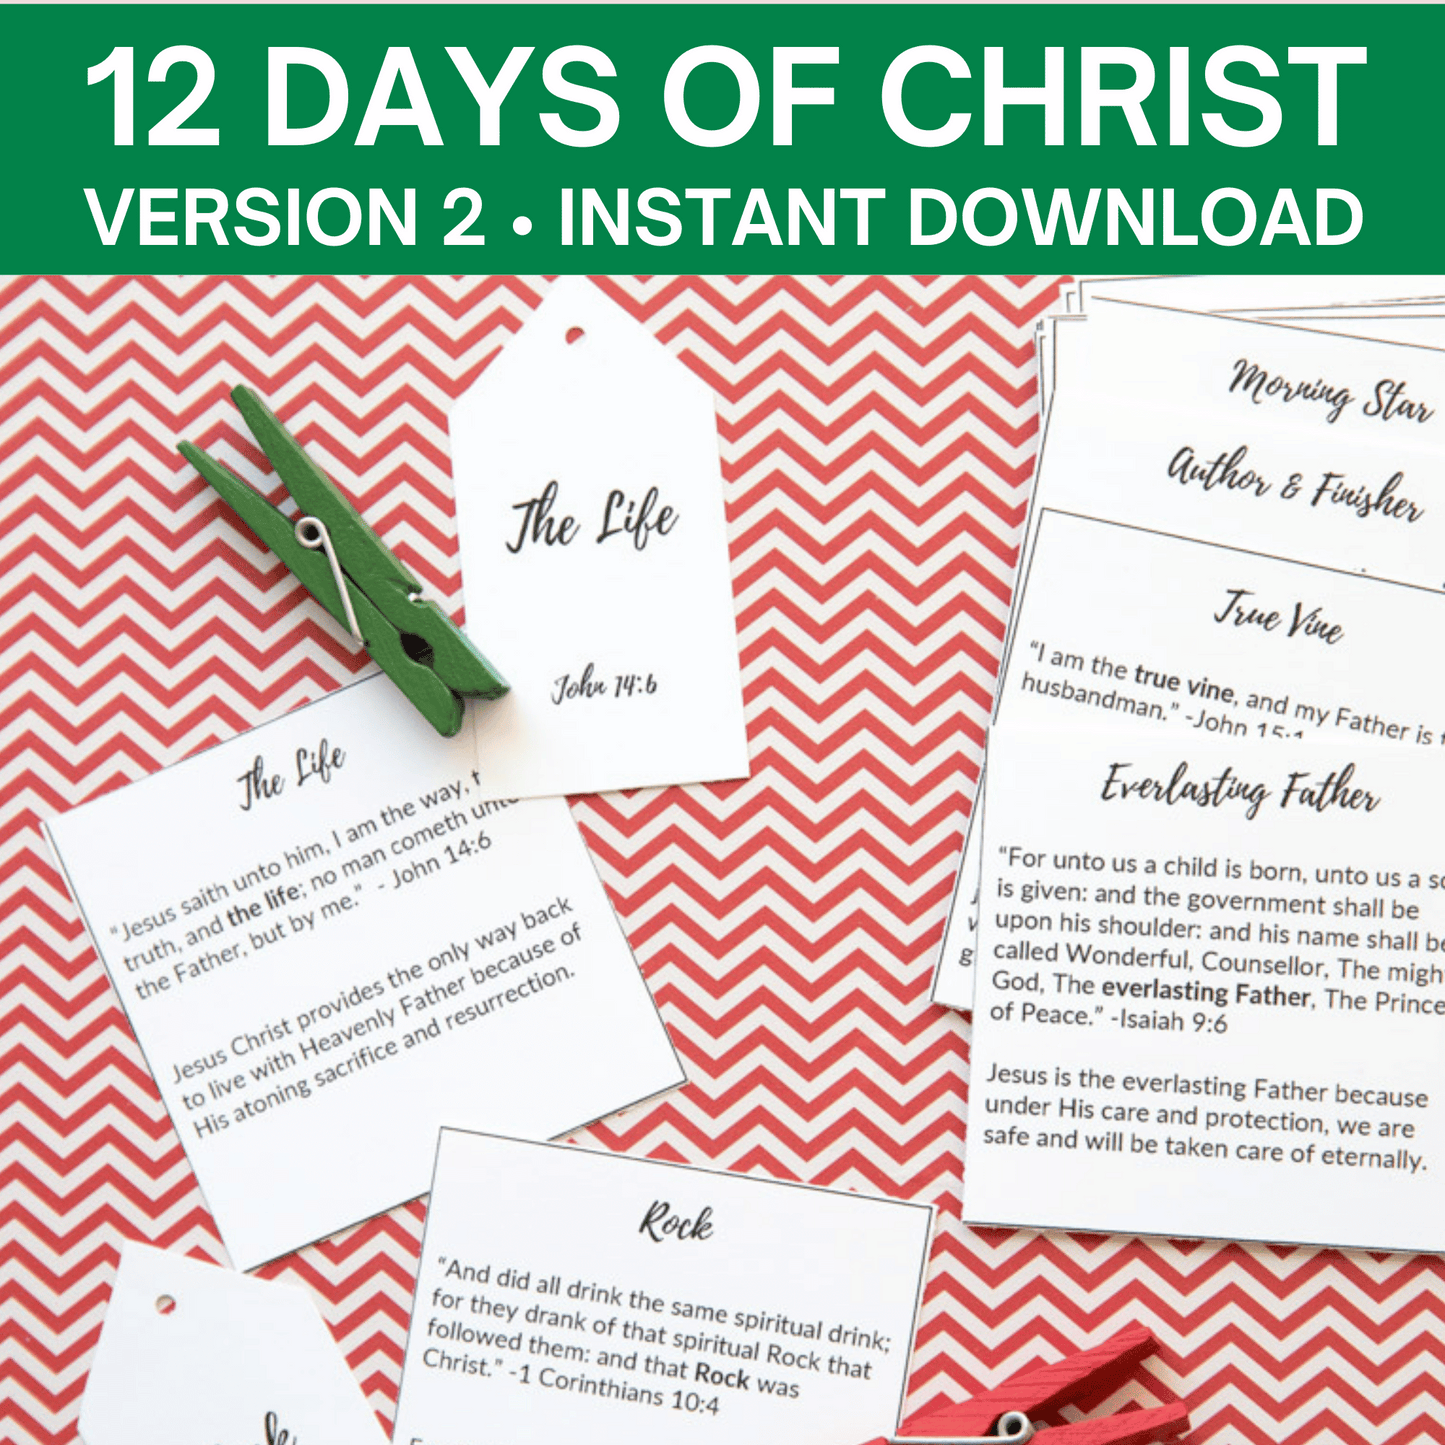 12 Day of Christ Bundle- 45 Name Tags, Gift Ideas, Companion Cards, & – So  Festive!